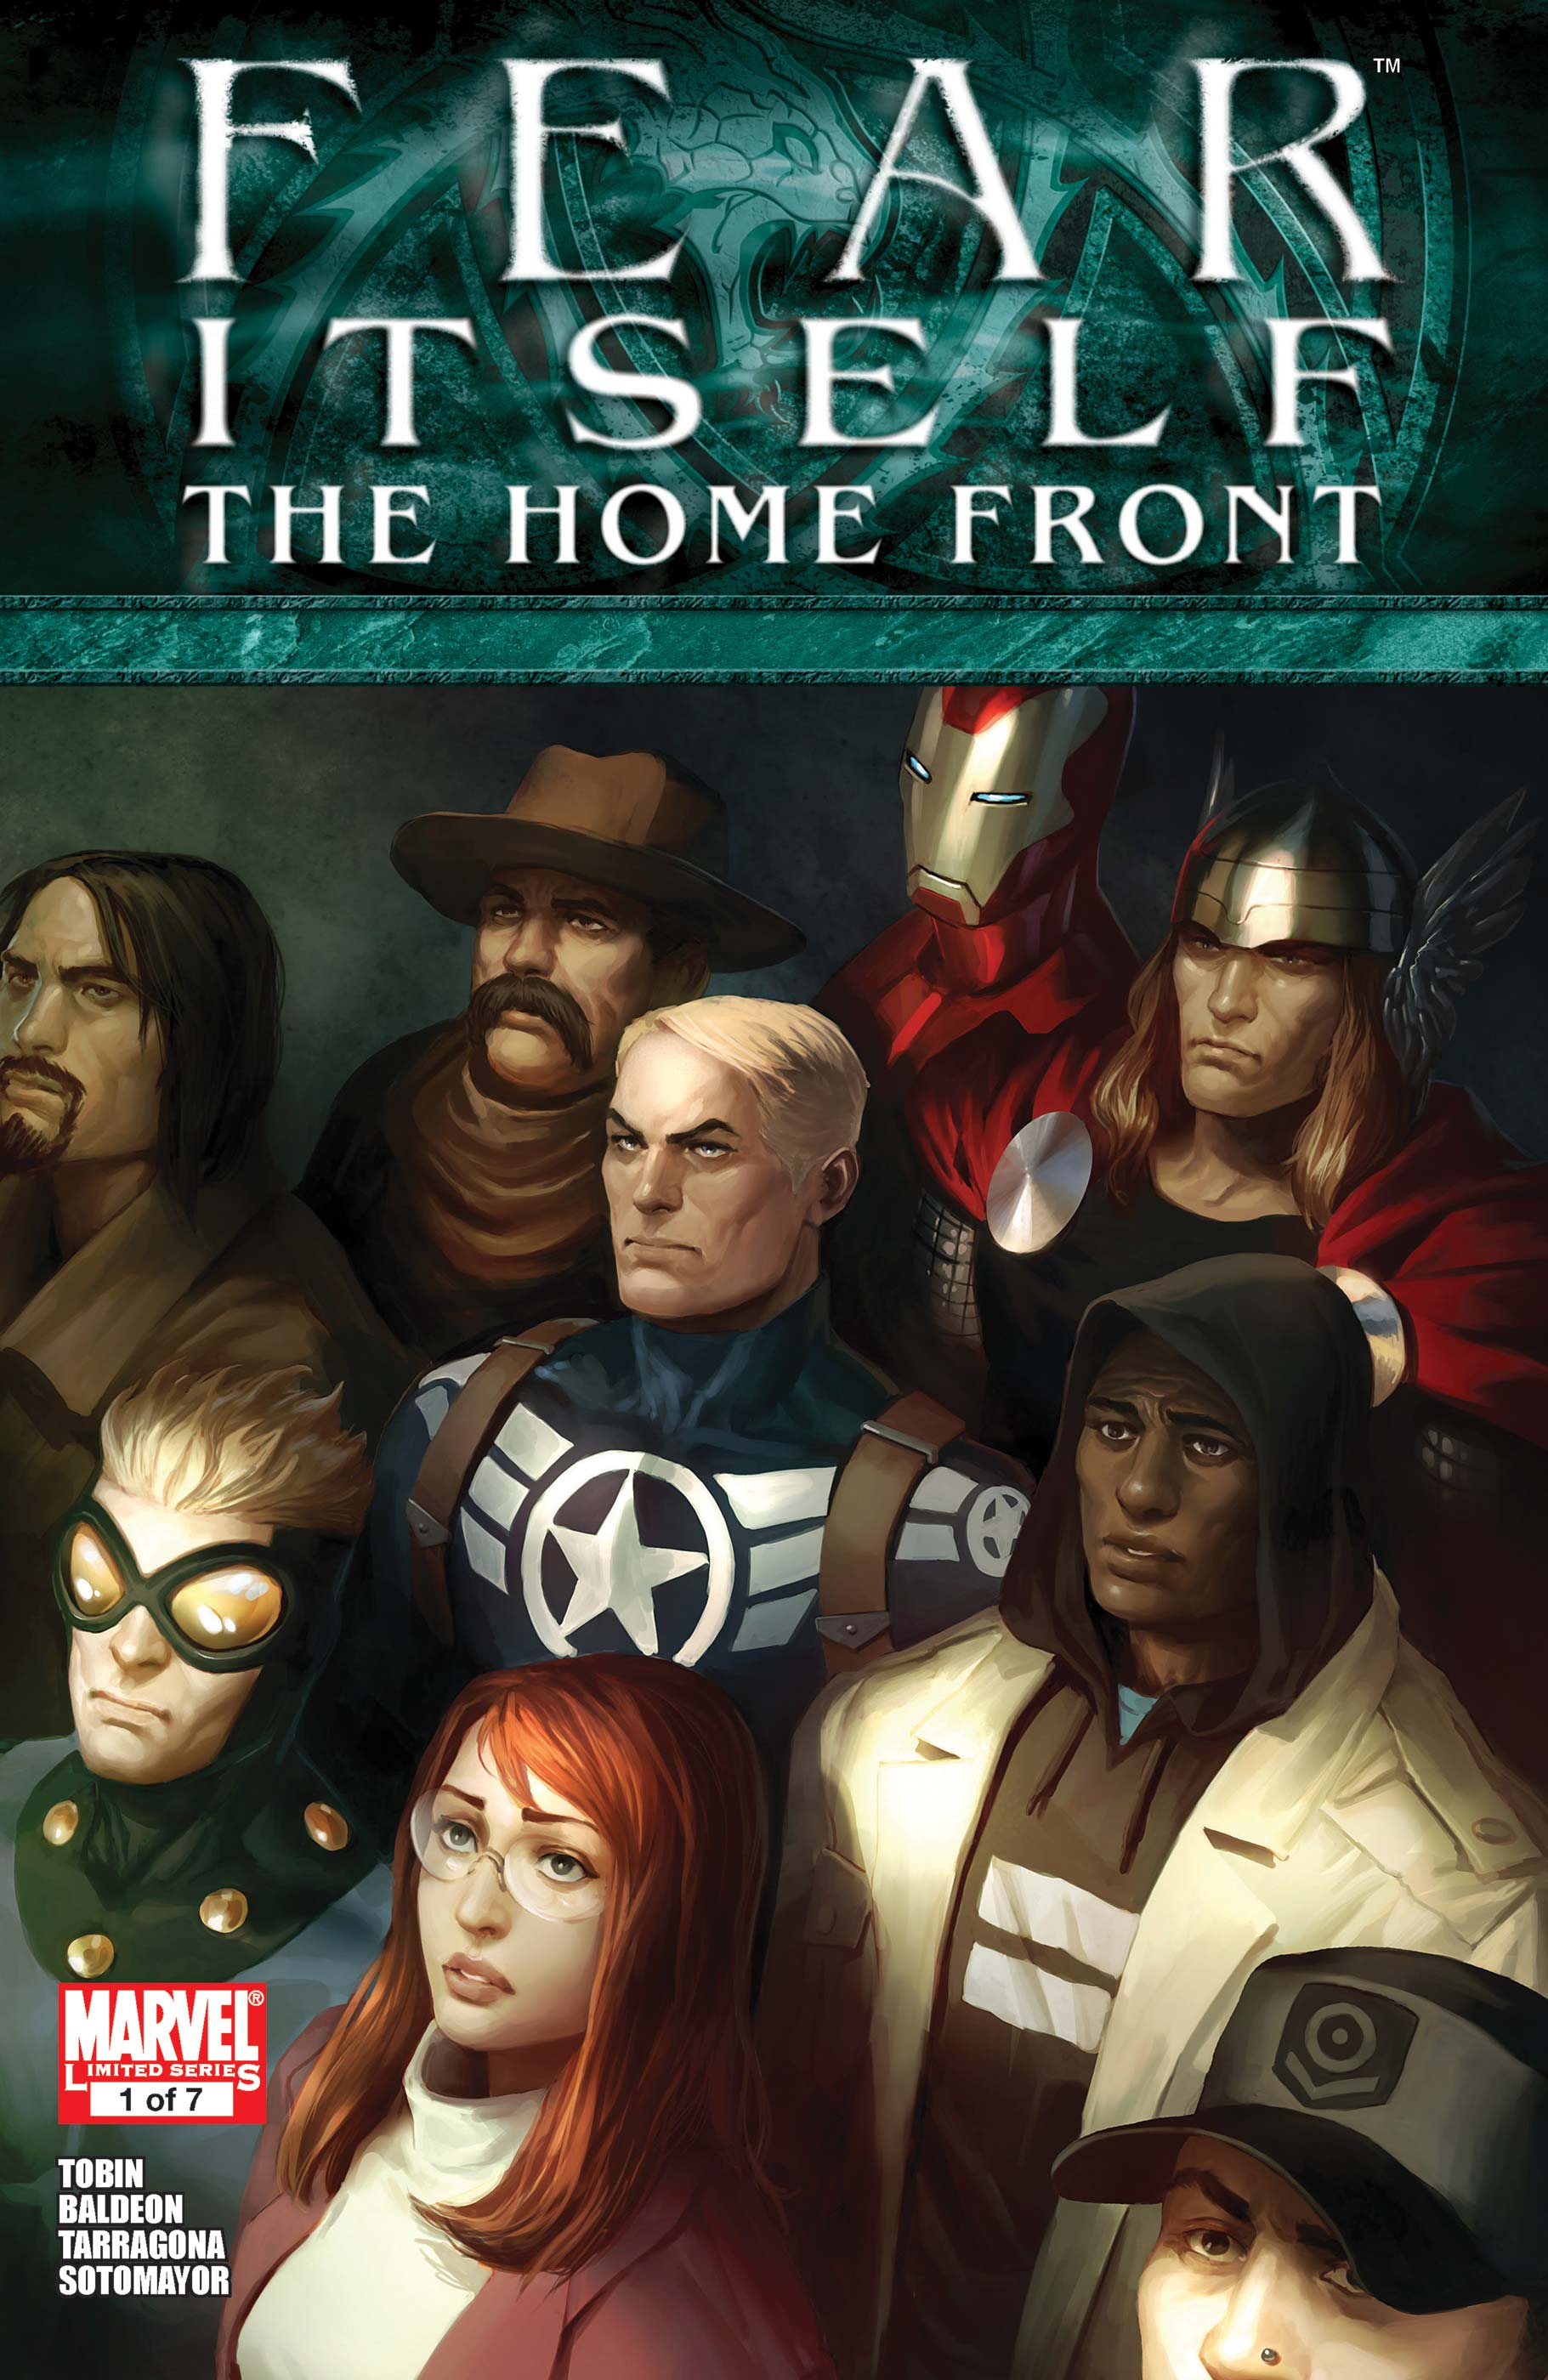 Fear Itself: The Home Front (2010) #1